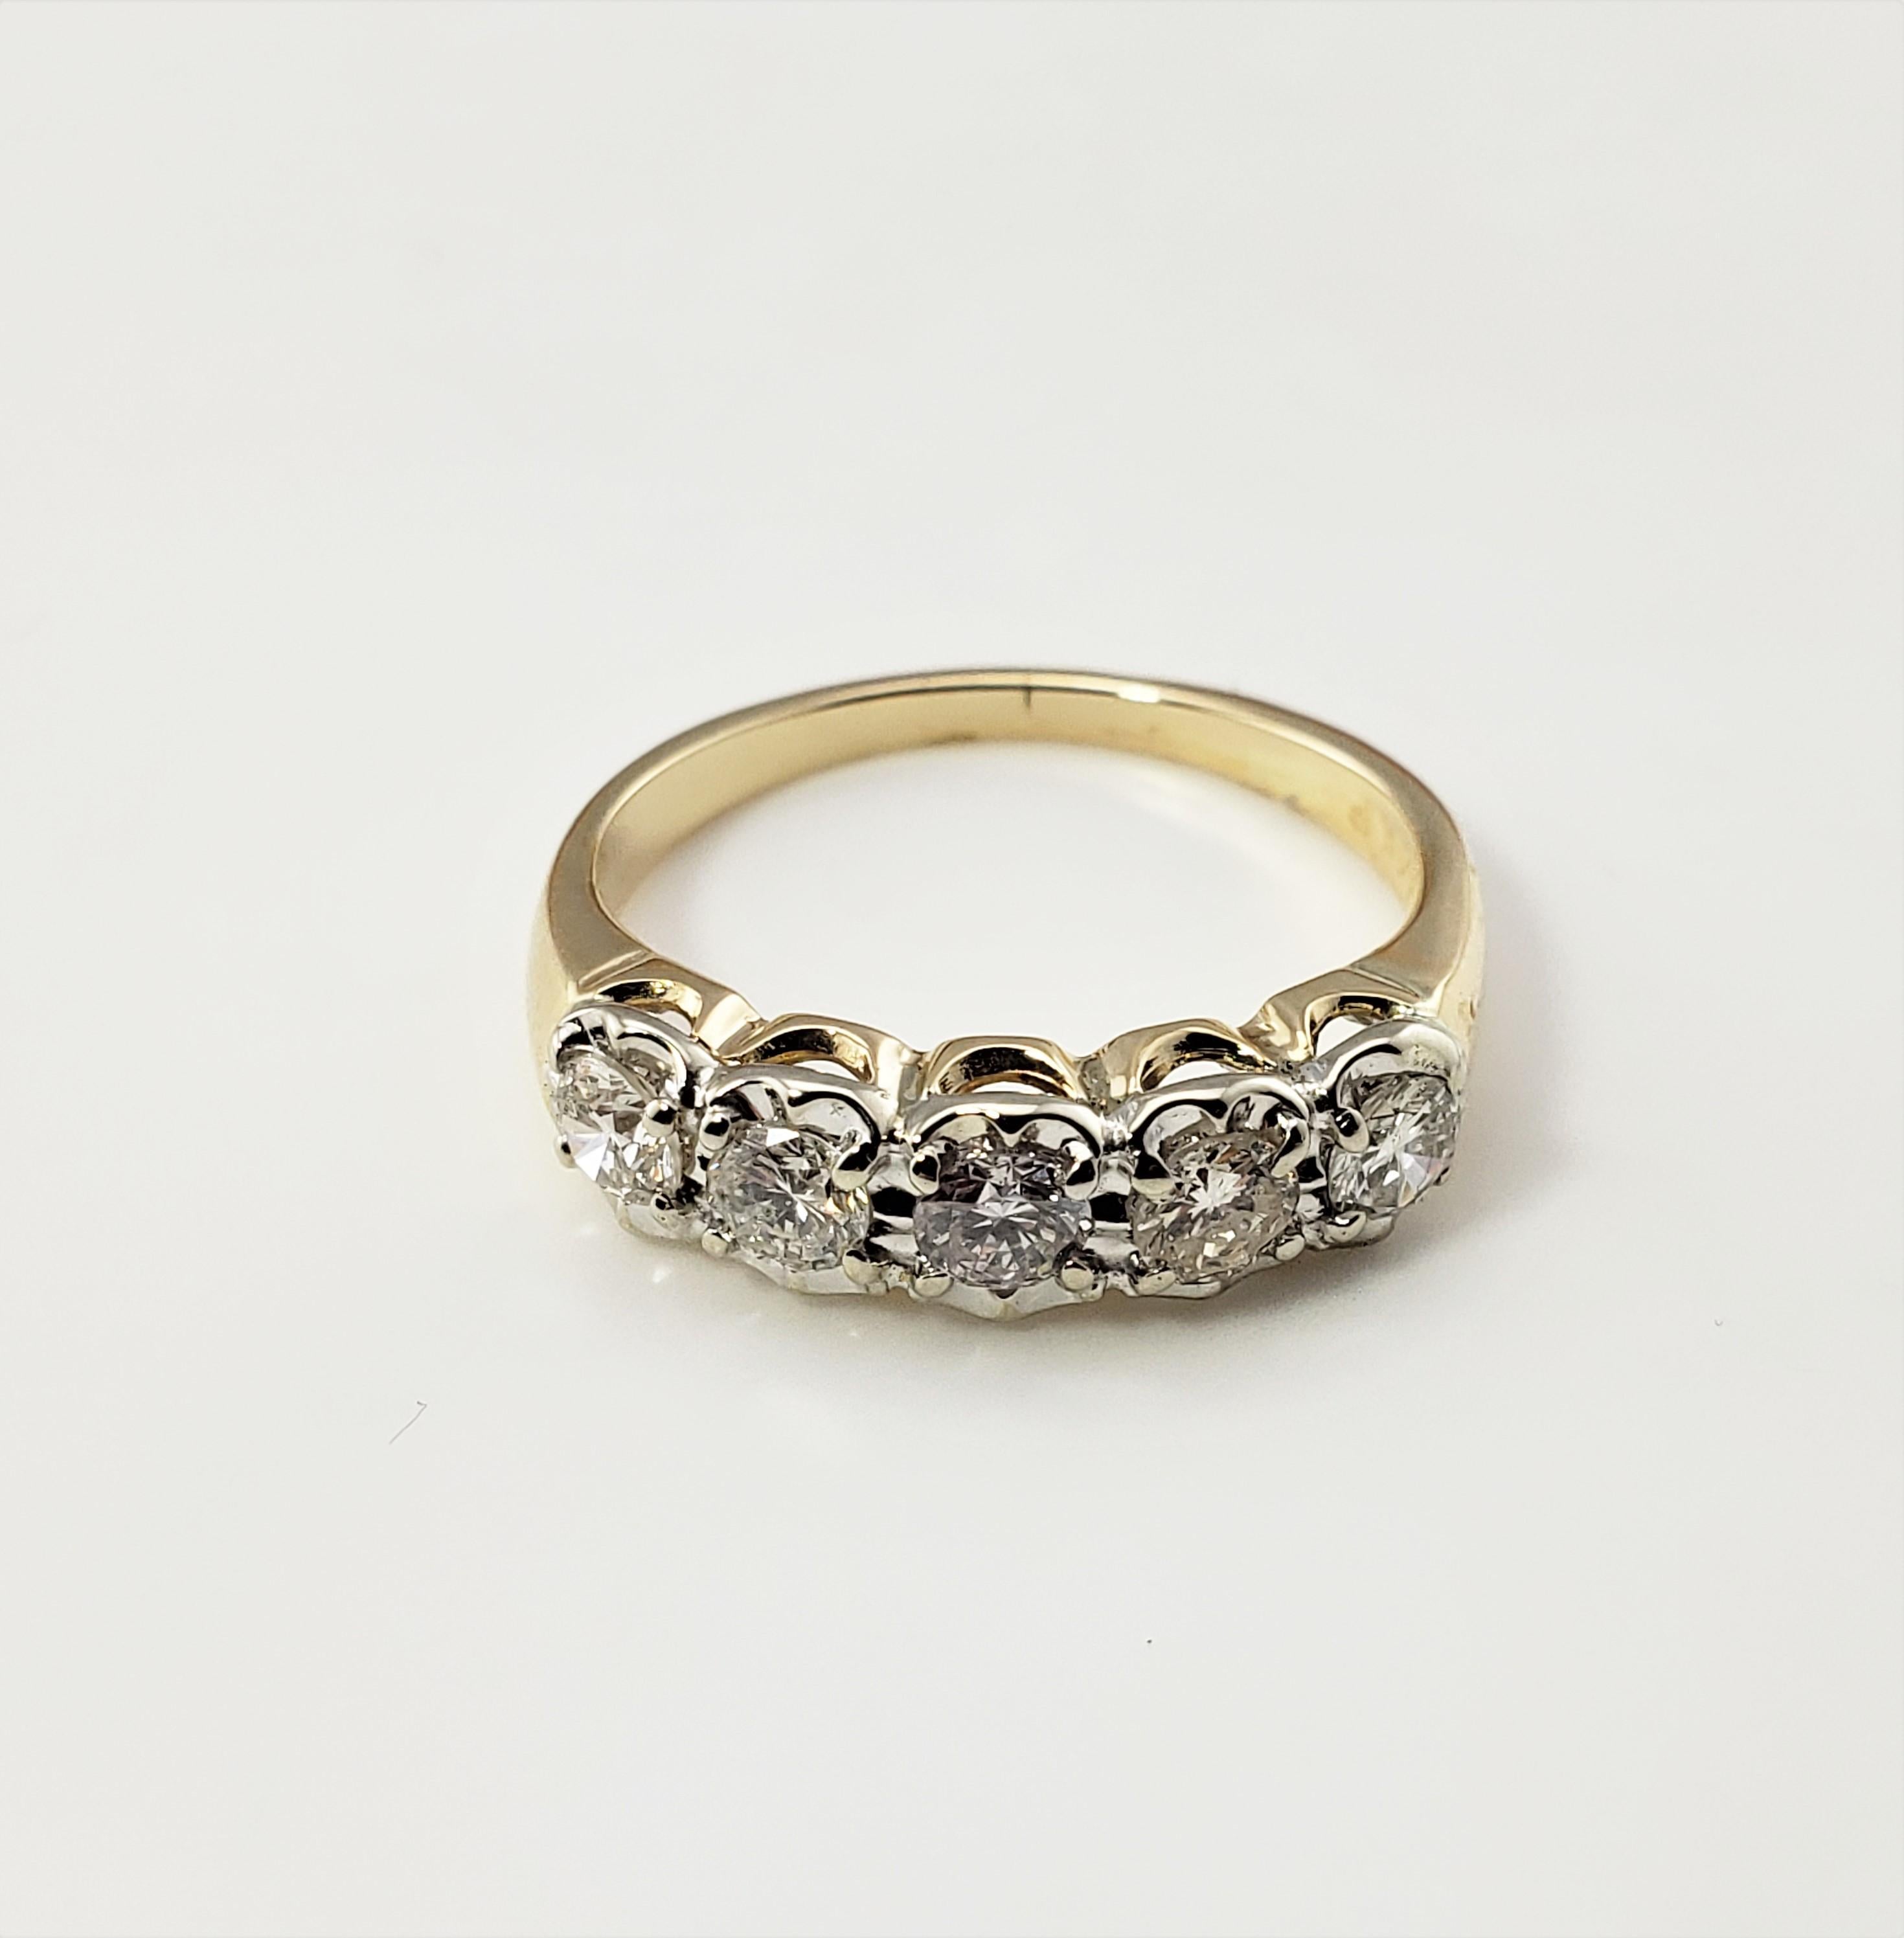 14 Karat Yellow Gold and Diamond Ring Size 6.5-

This sparkling ring features four round brilliant cut diamonds set in classic 14K white and yellow gold.  (Diamonds set in white gold; band is yellow gold)
Width:  5 mm.  Shank: 1 mm.

Approximate